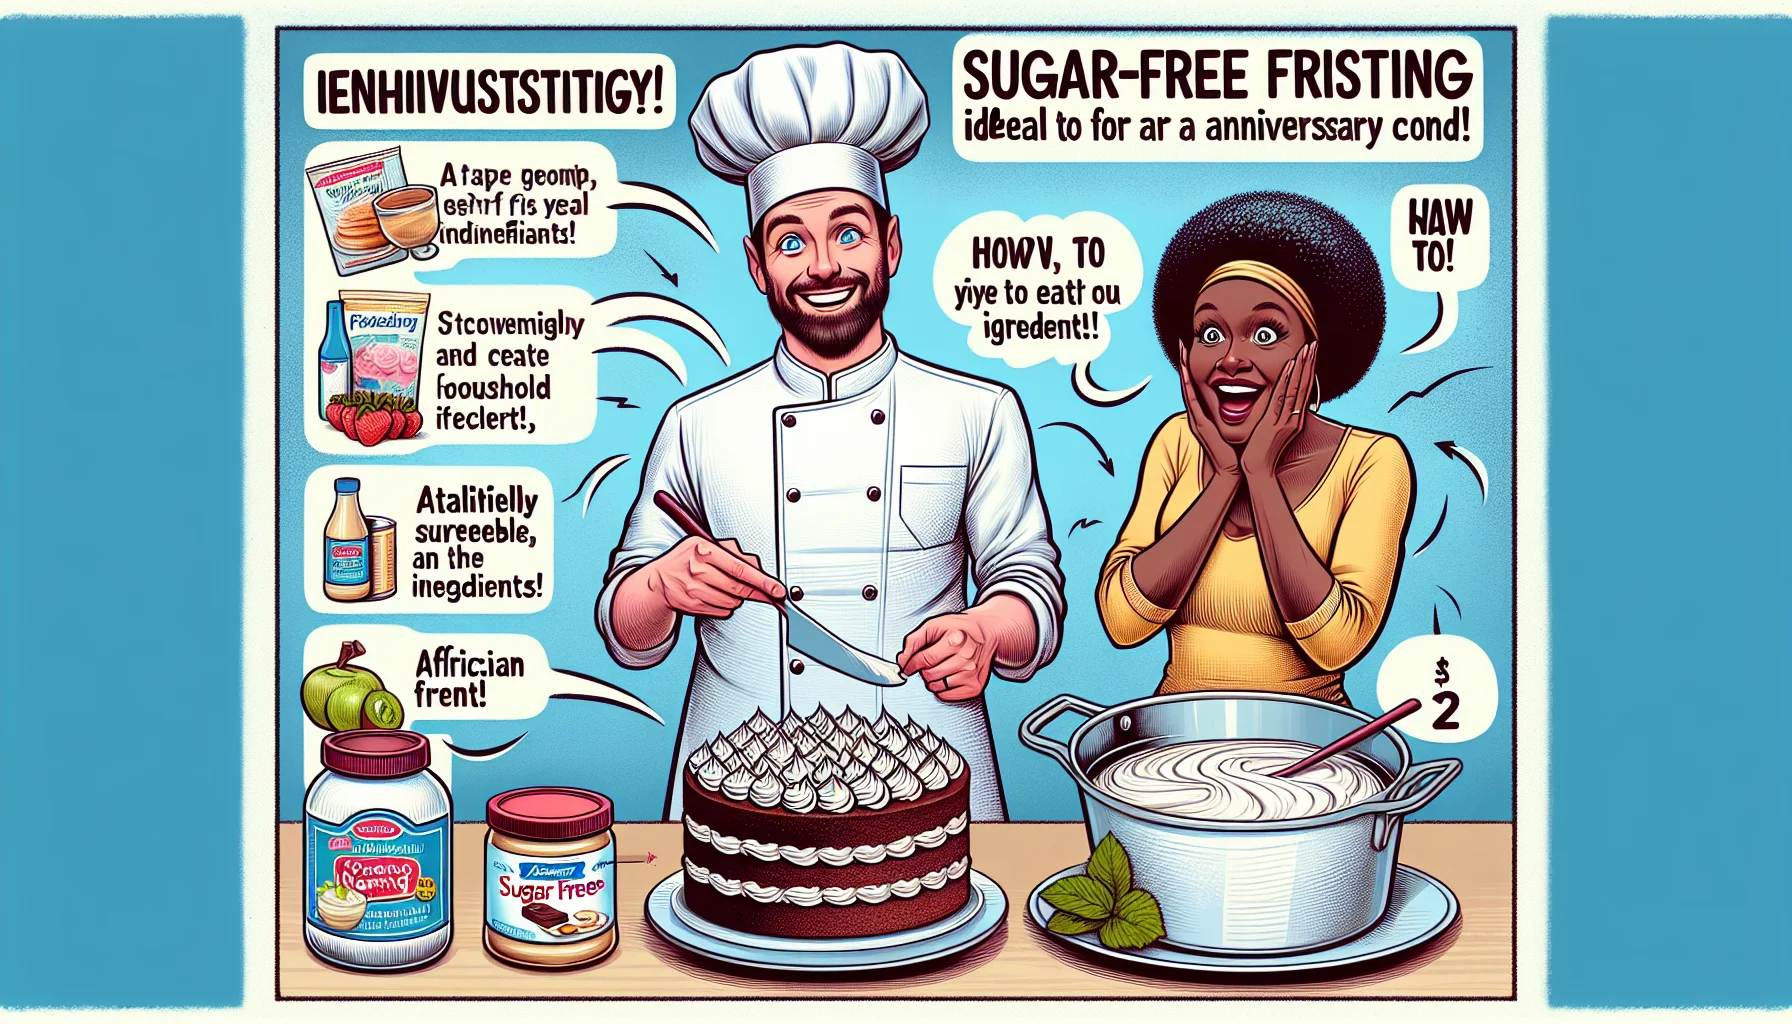 Create a humorous yet realistic illustration showcasing a sugar-free frosting recipe ideal for an anniversary occasion. Make it enticing and convenient for people to eat healthily at a reduced cost. Portrait a Caucasian male wearing a chef hat, demonstrating the steps to create the sugar-free frosting with household ingredients, whereas an African descent woman is optimistically surprised by the cost of the ingredients found in her pantry. Use vivid colors for atheistically pleasing visuals and playful fonts to label the ingredients and the steps.